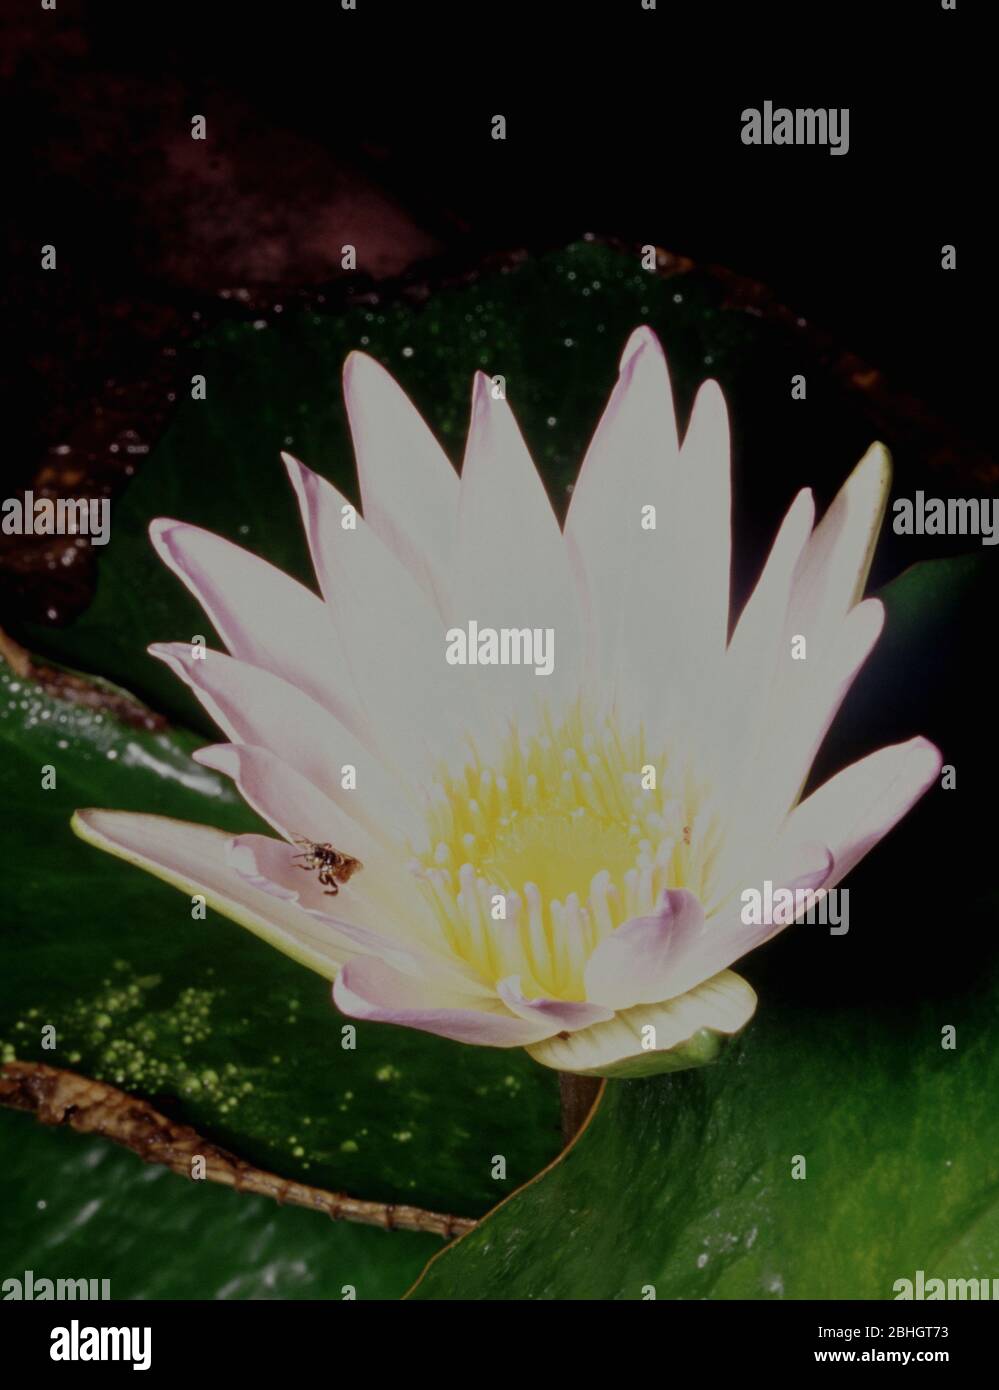 Pollinating Egyptian water lily flower (Nymphaea lotus) by insect (bee) Stock Photo